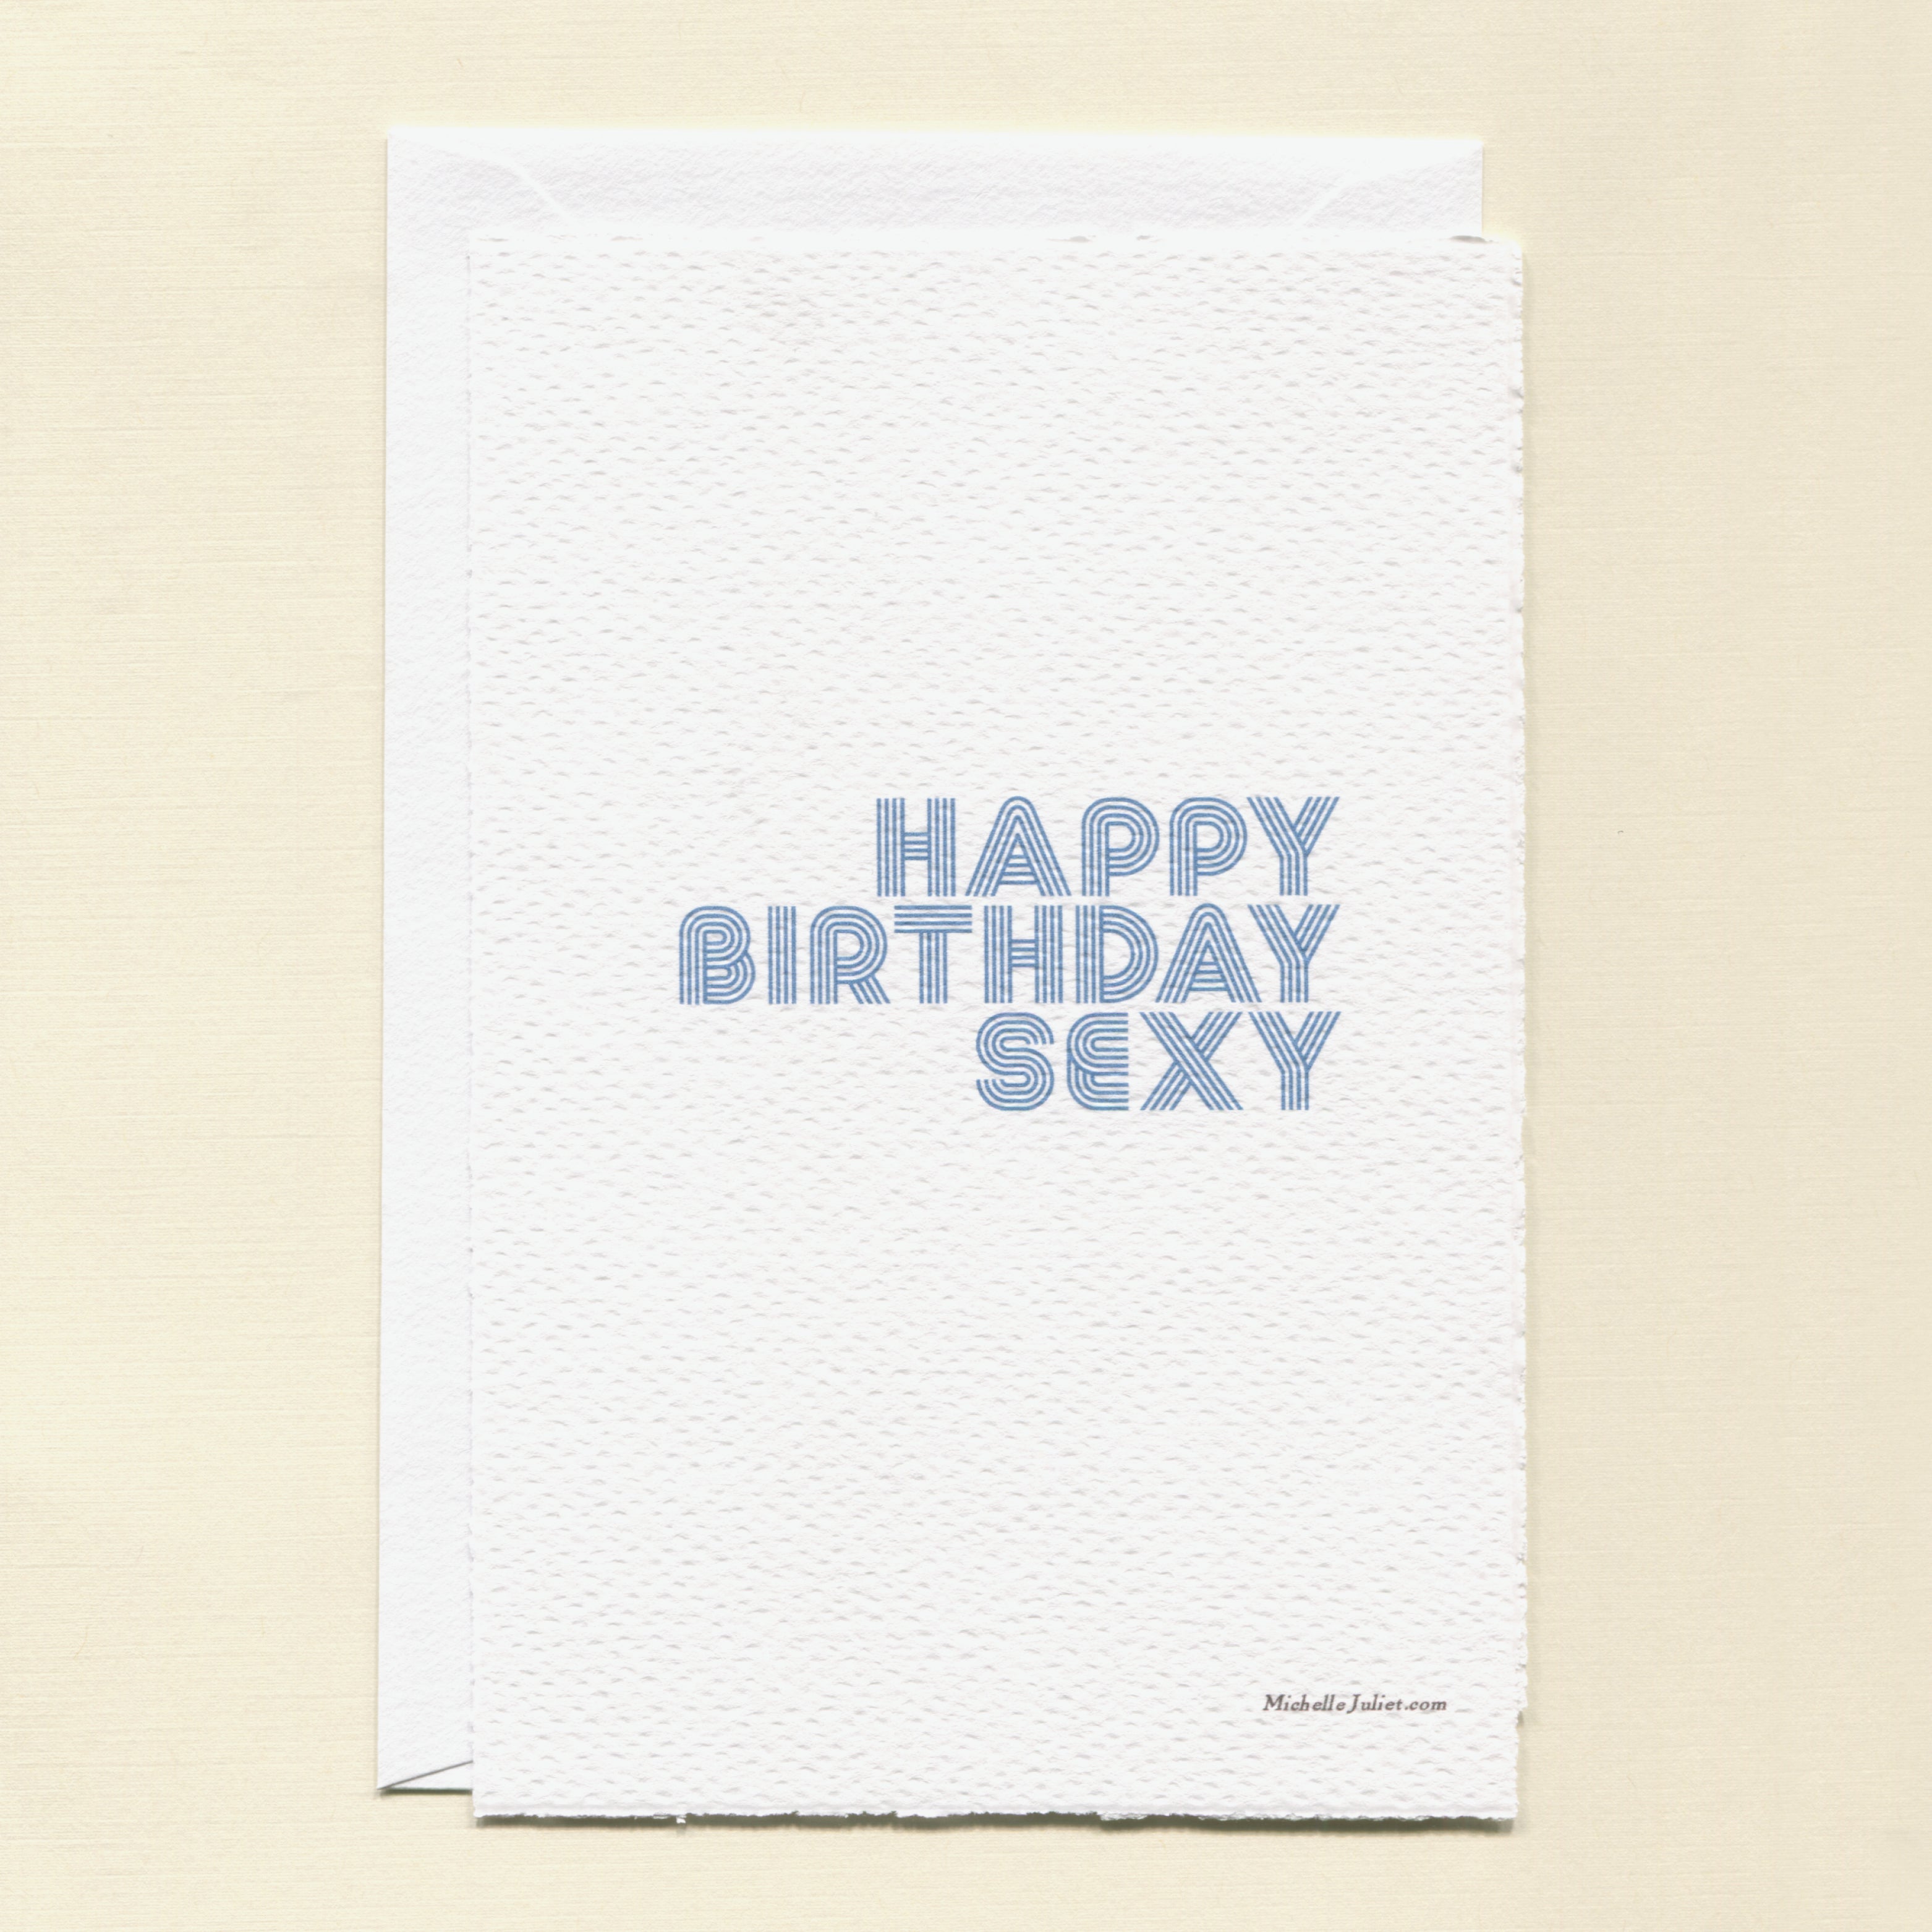 Happy Birthday Sexy Greeting Cards - Pack of 6